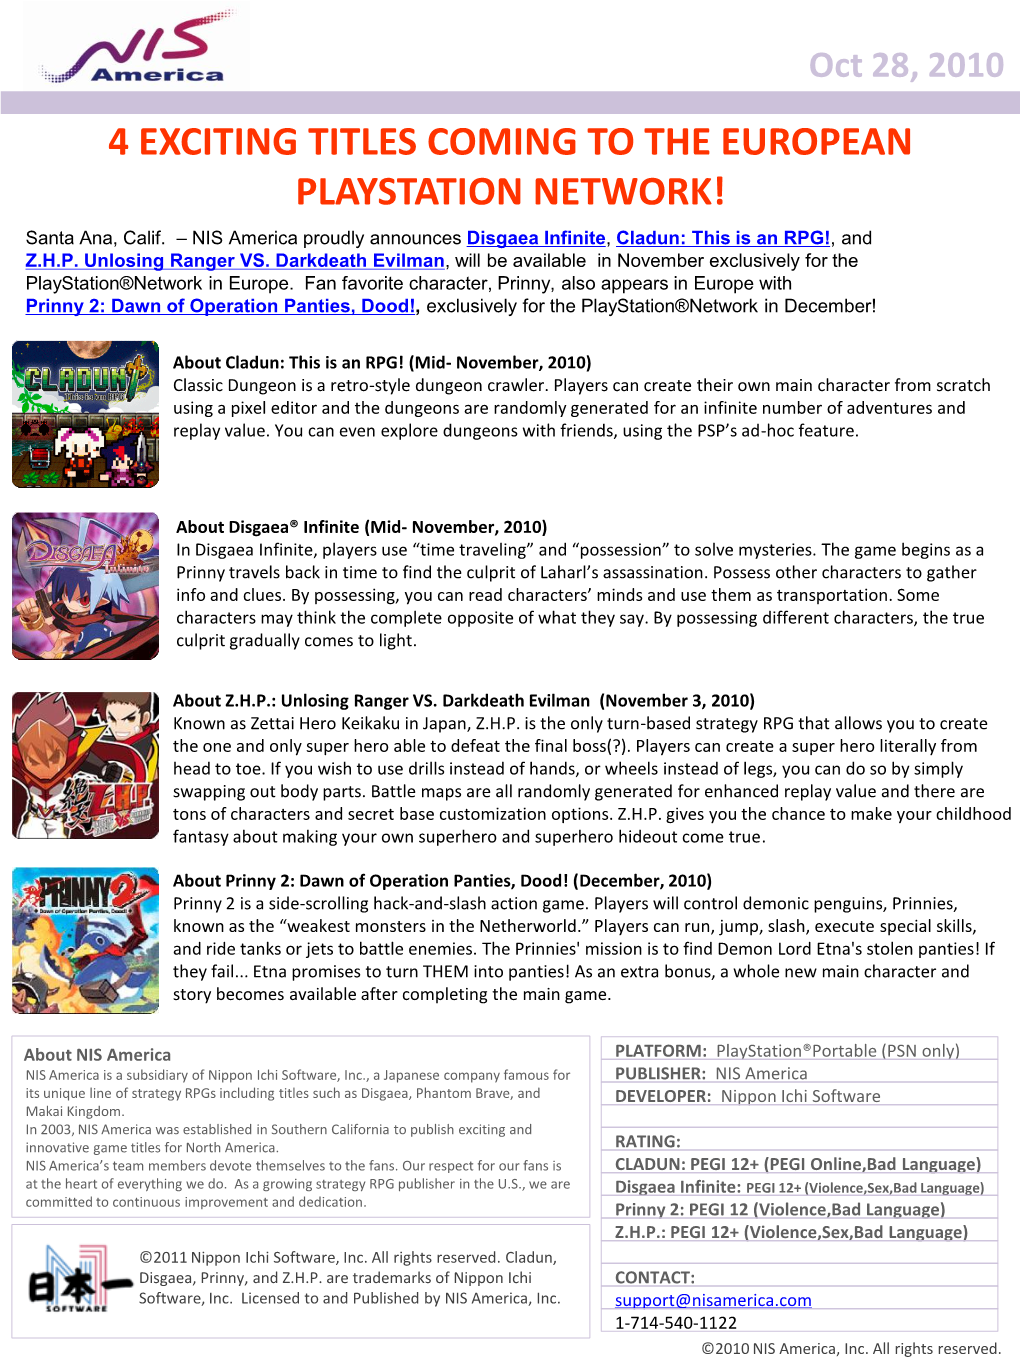 4 EXCITING TITLES COMING to the EUROPEAN PLAYSTATION NETWORK! Santa Ana, Calif